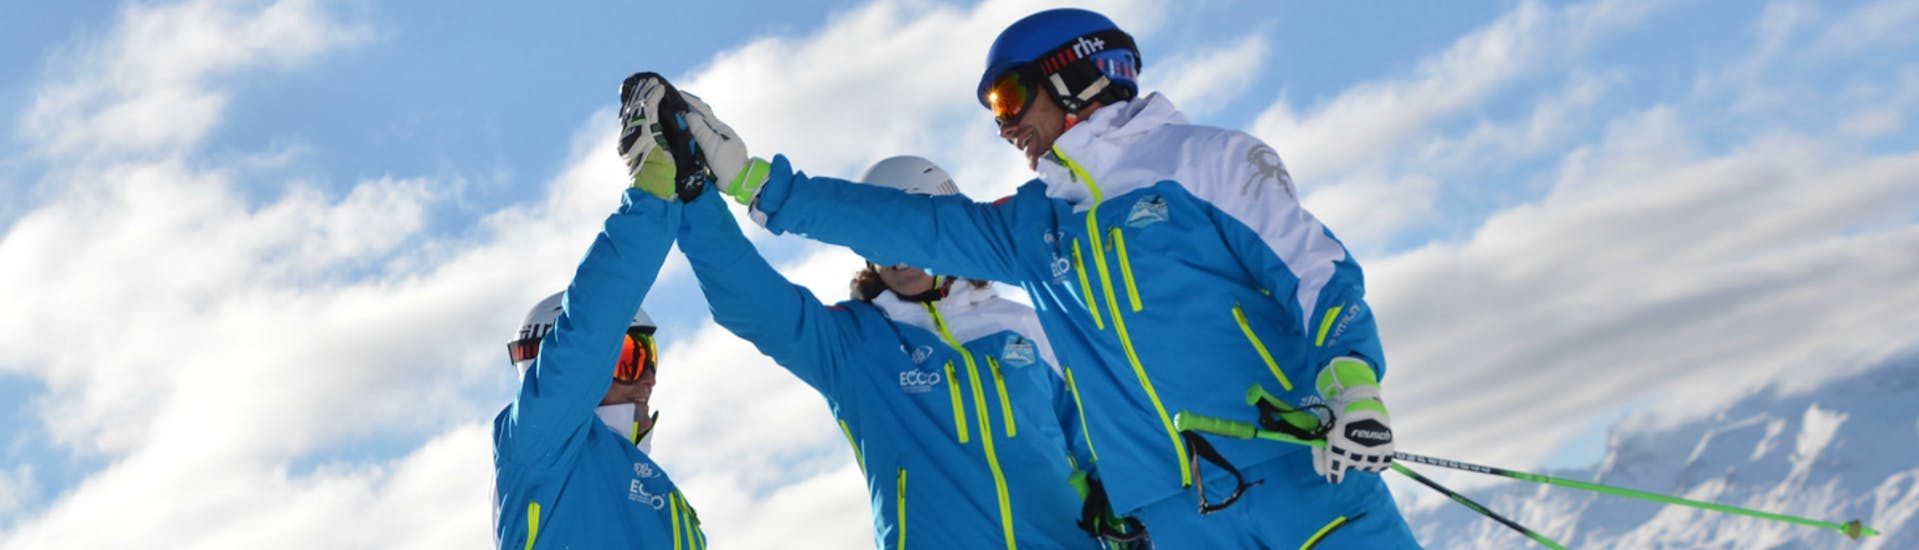 Three ski instructors from the Silvaplana Top Snowsports ski school give each other a high-five during the kids ski lessons for all levels.